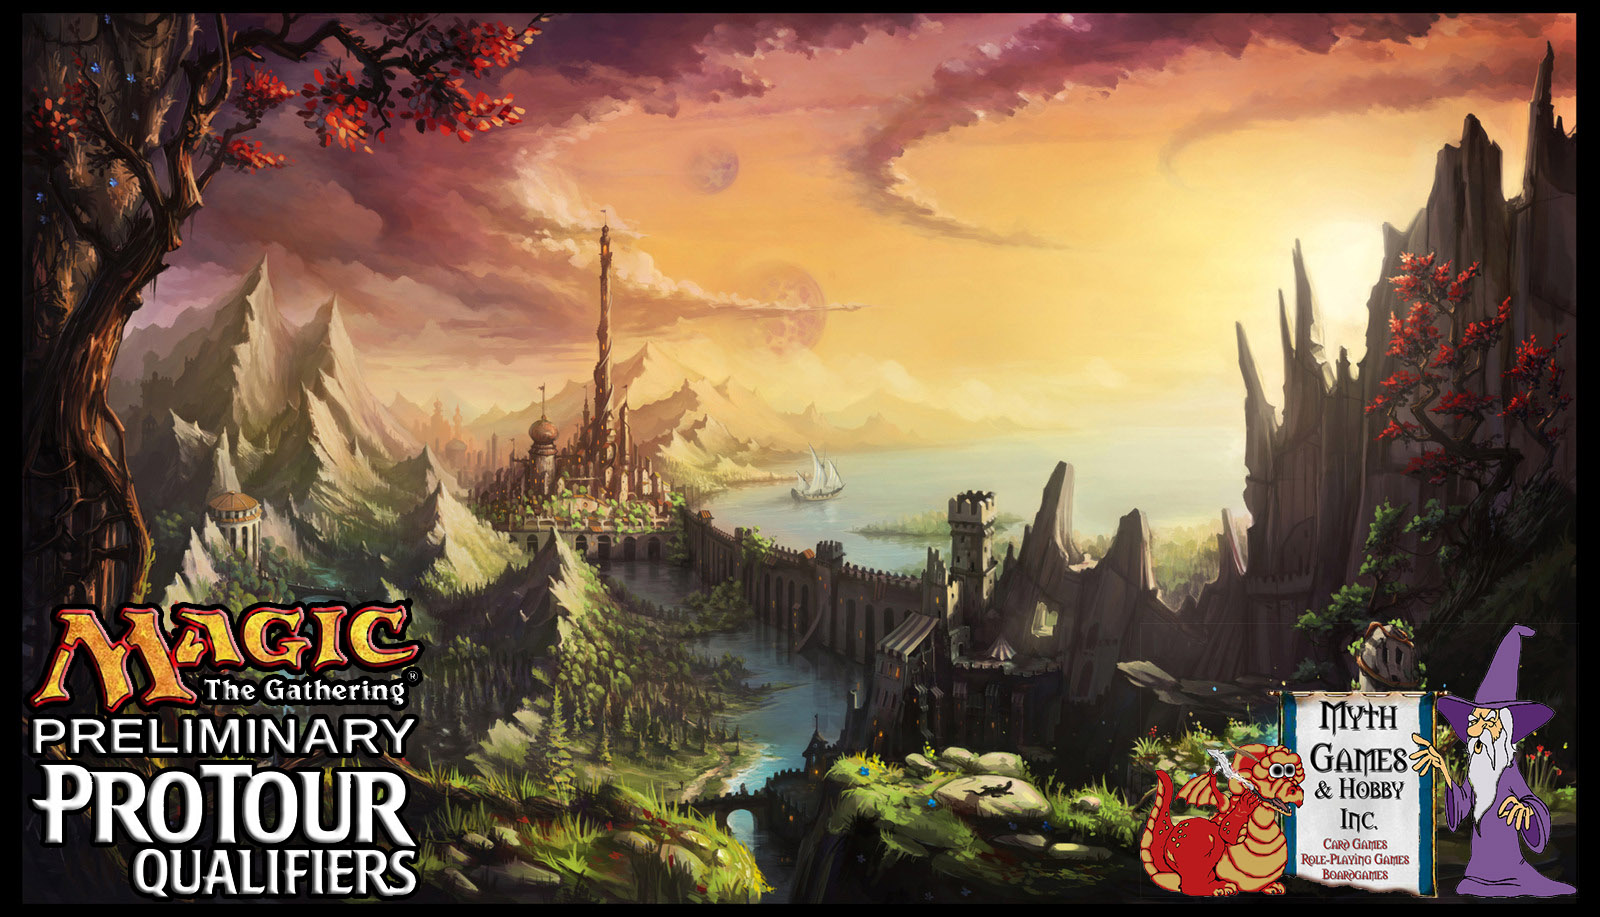 Magic the Gathering Preliminary Pro Tour Qualifier for the first event of 2016